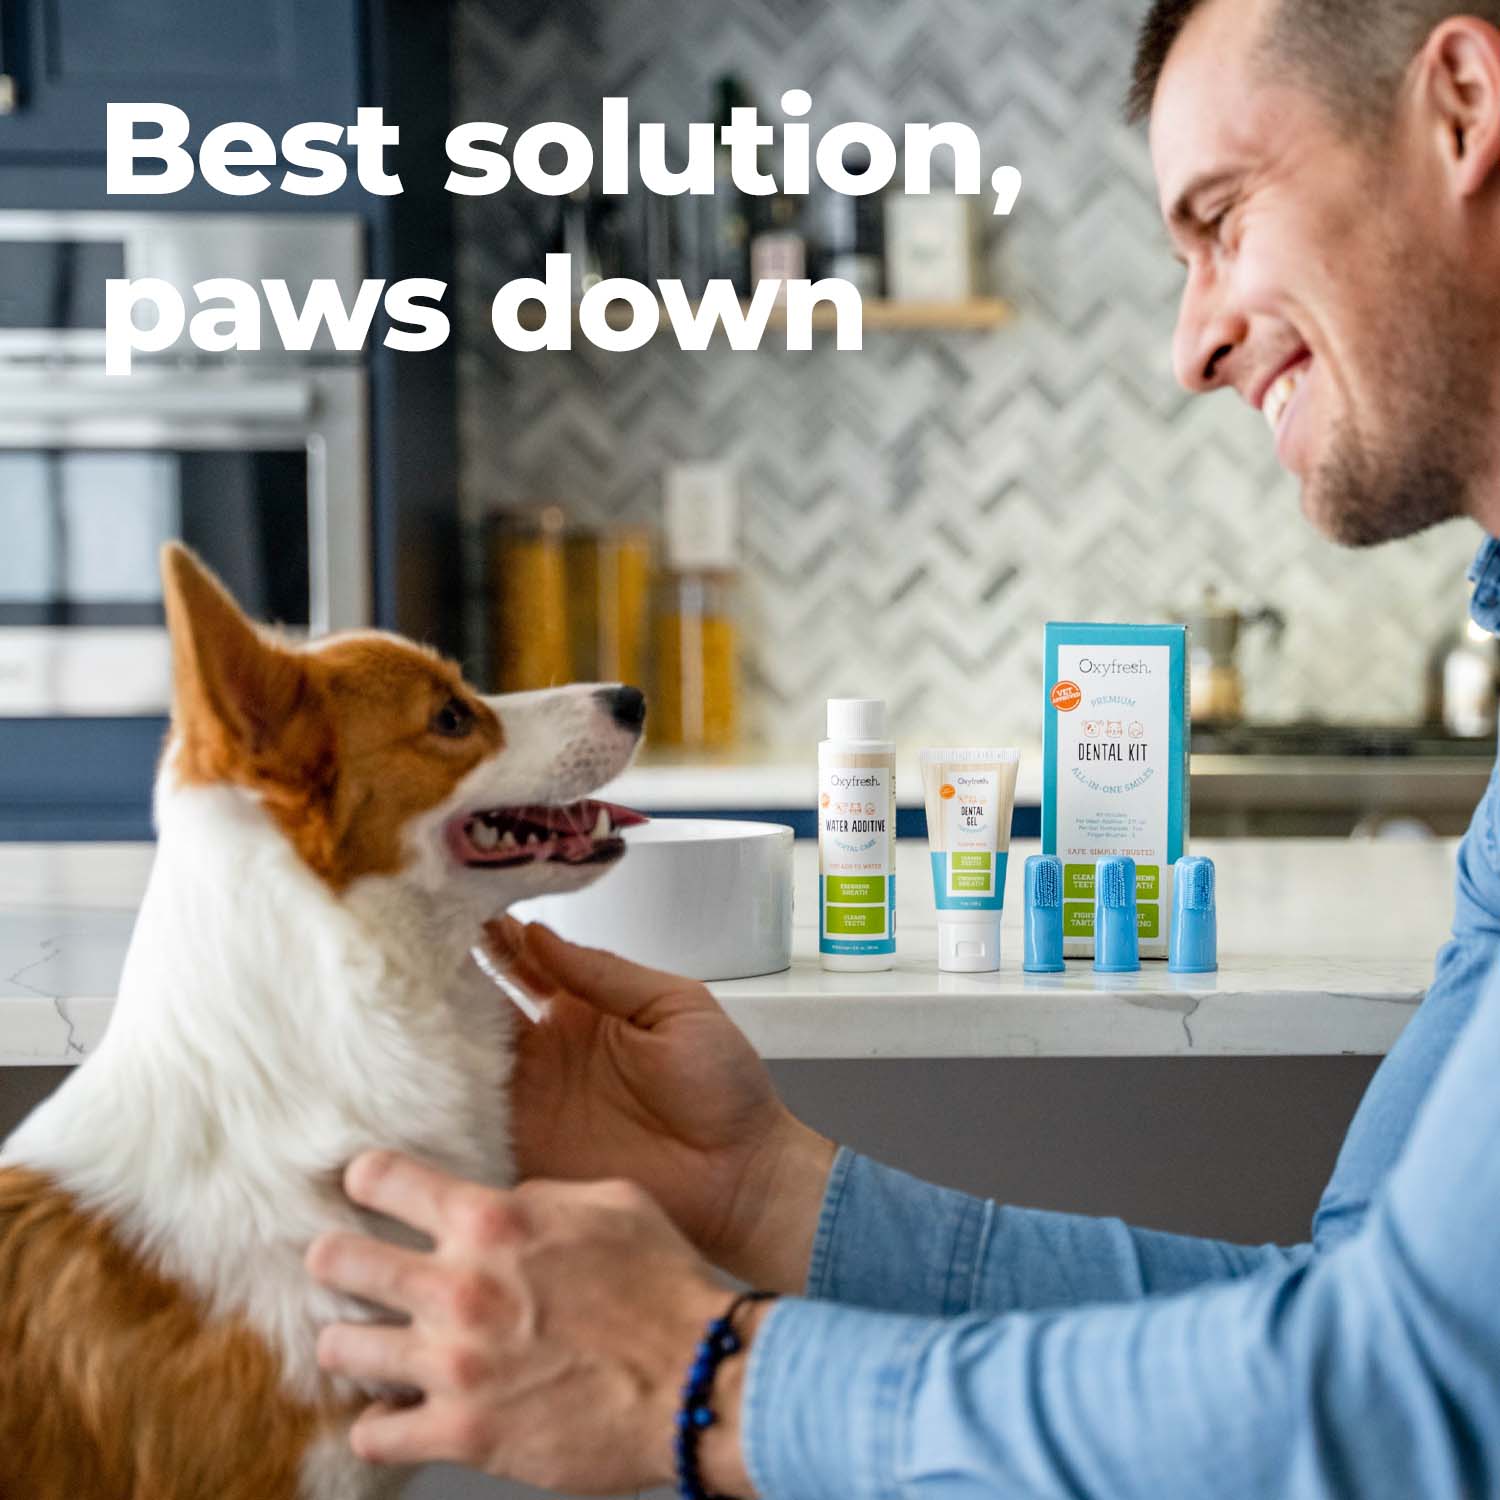 man smiling with his corgi in front of the oxyfresh pet dental kit which is the best solution, paws down